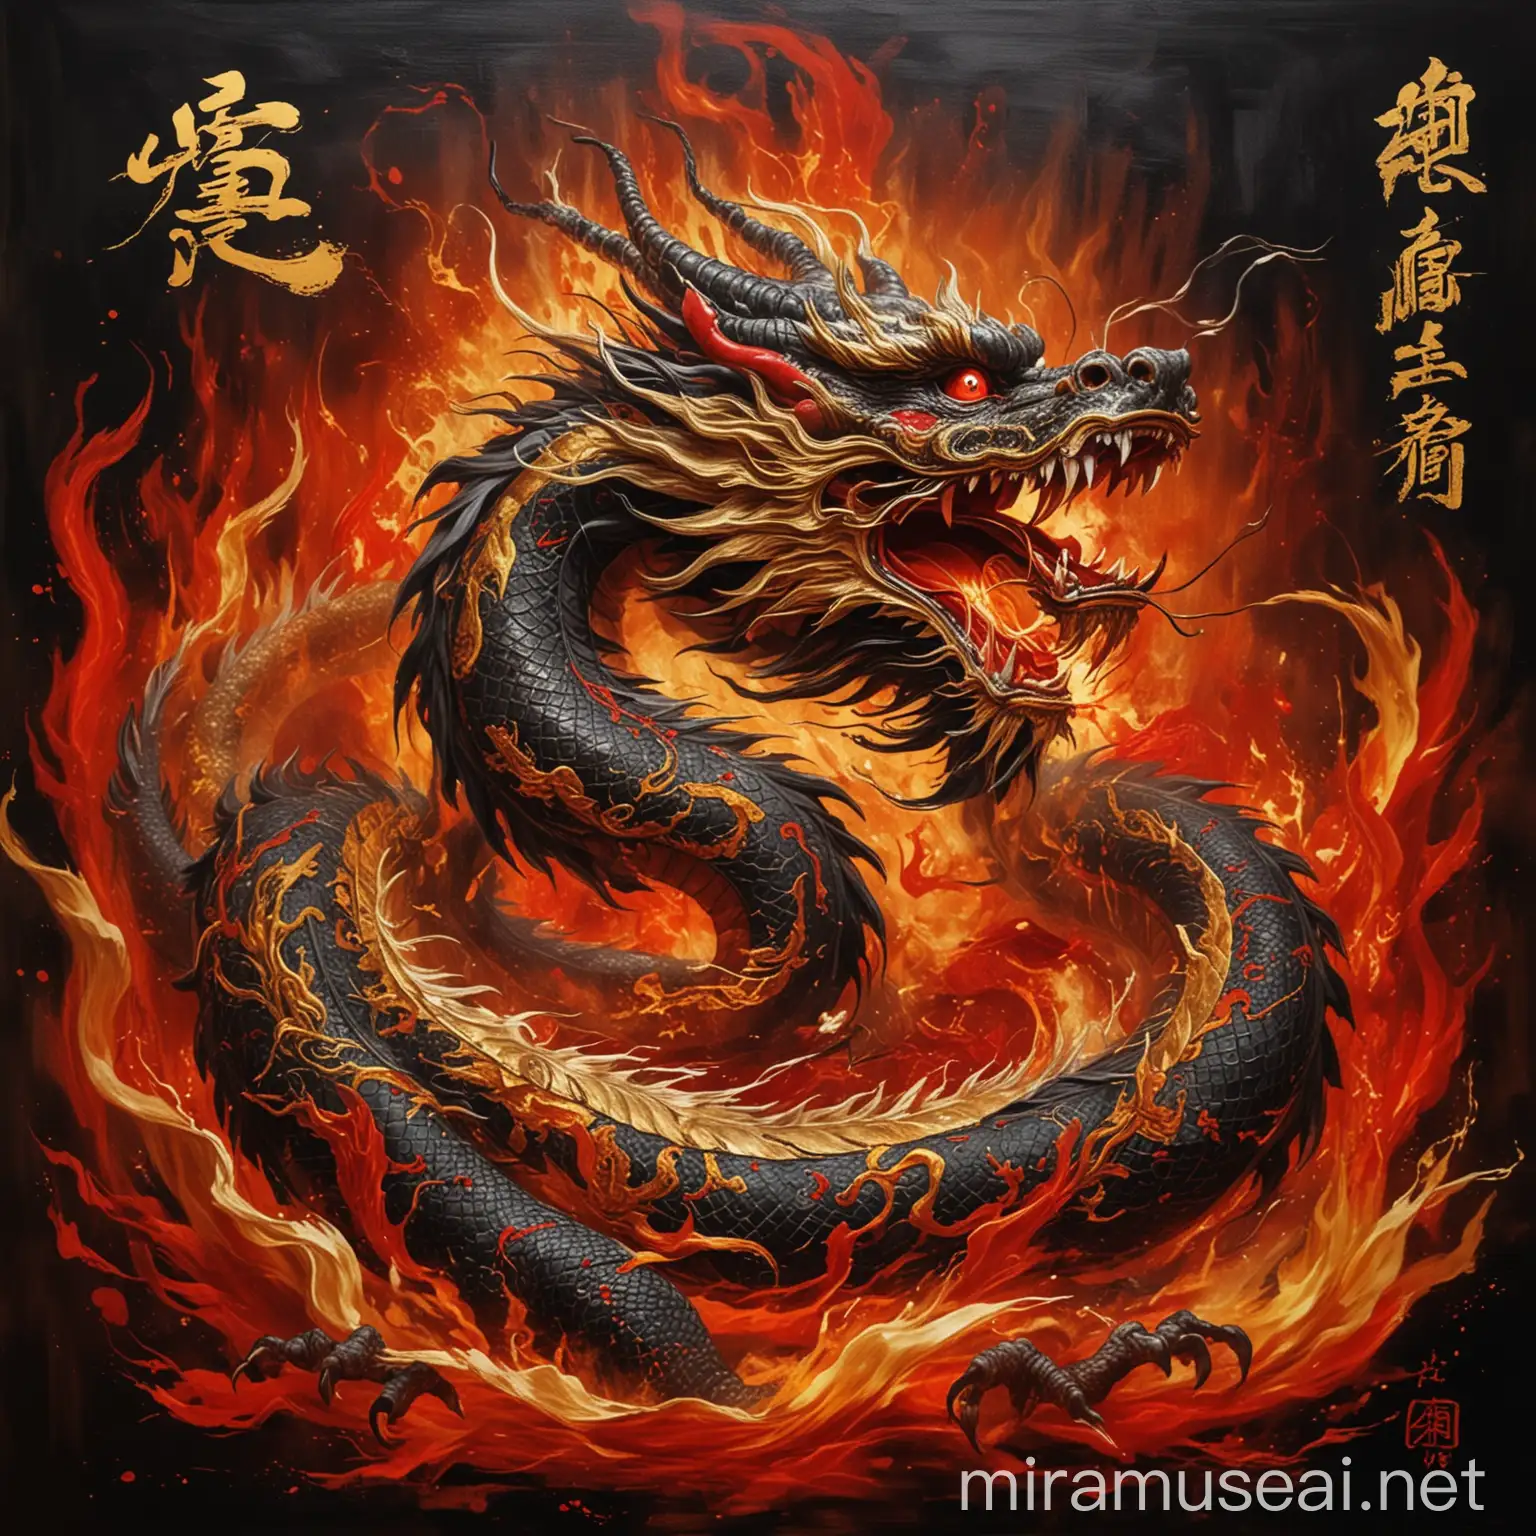 Ancient Chinese Dragon Painting in Golden and Black with Fiery Red Accents